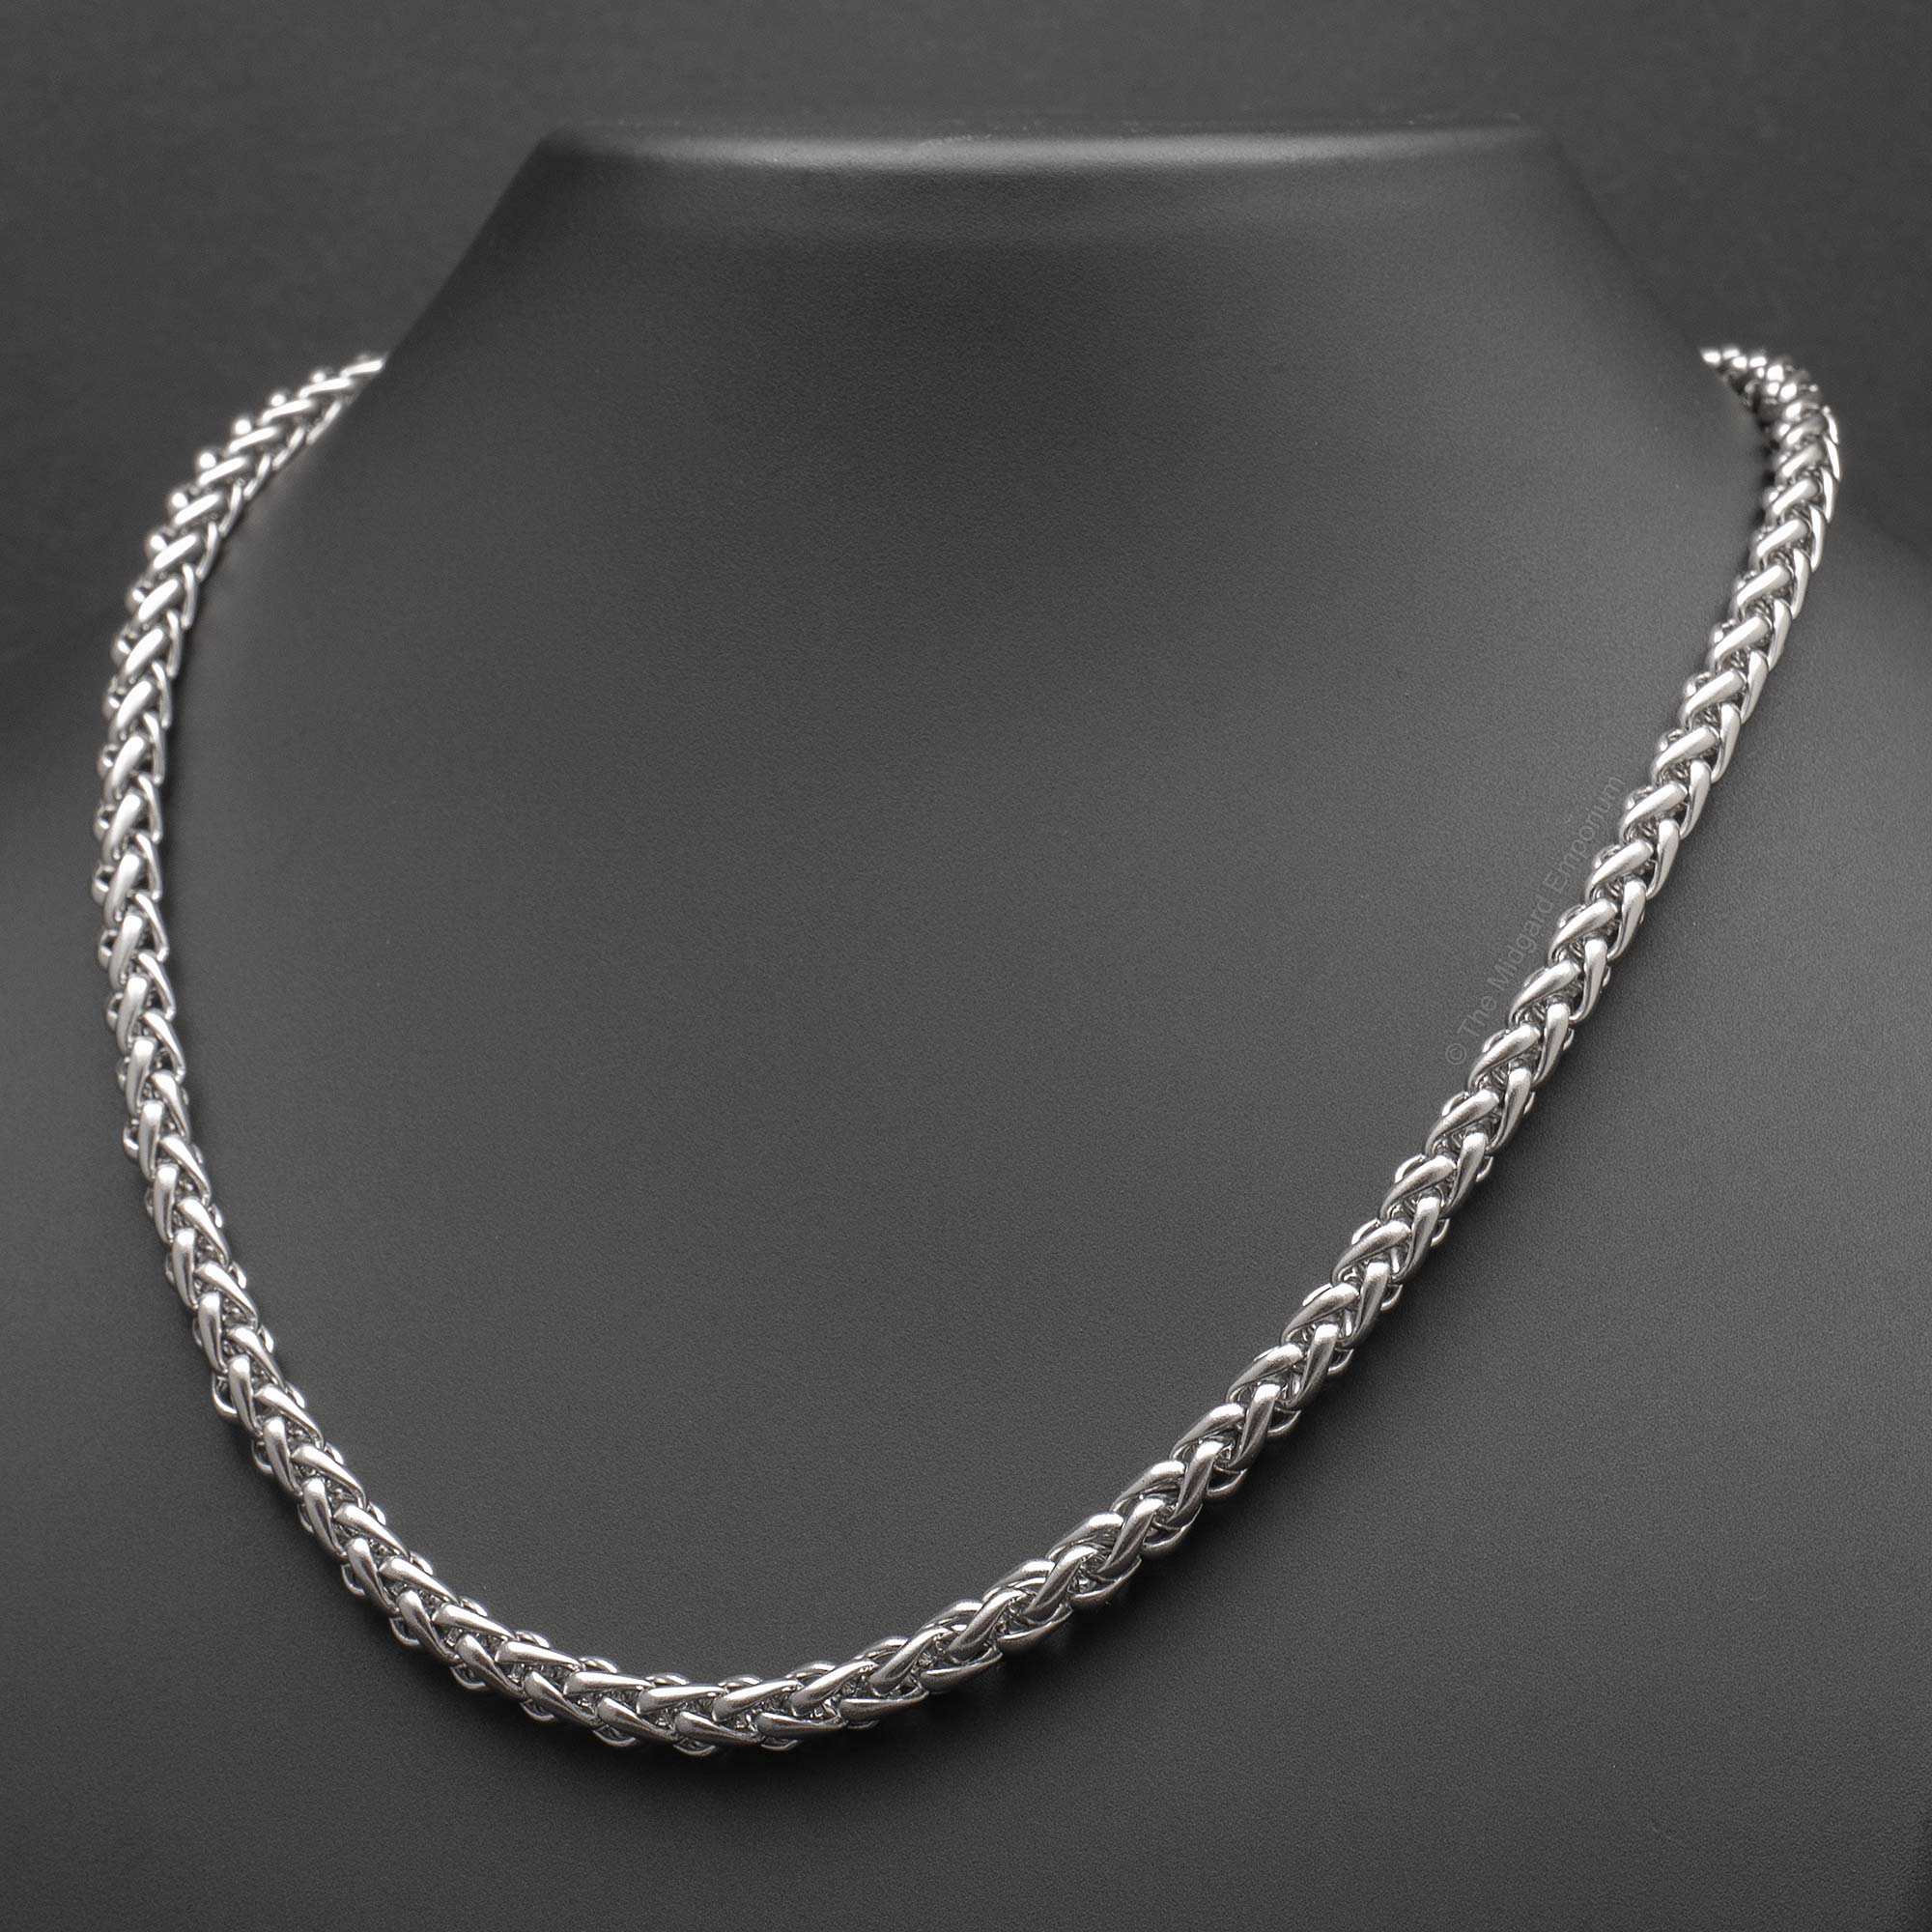 5mm Stainless Steel Wheat Chain Necklace - The Midgard Emporium